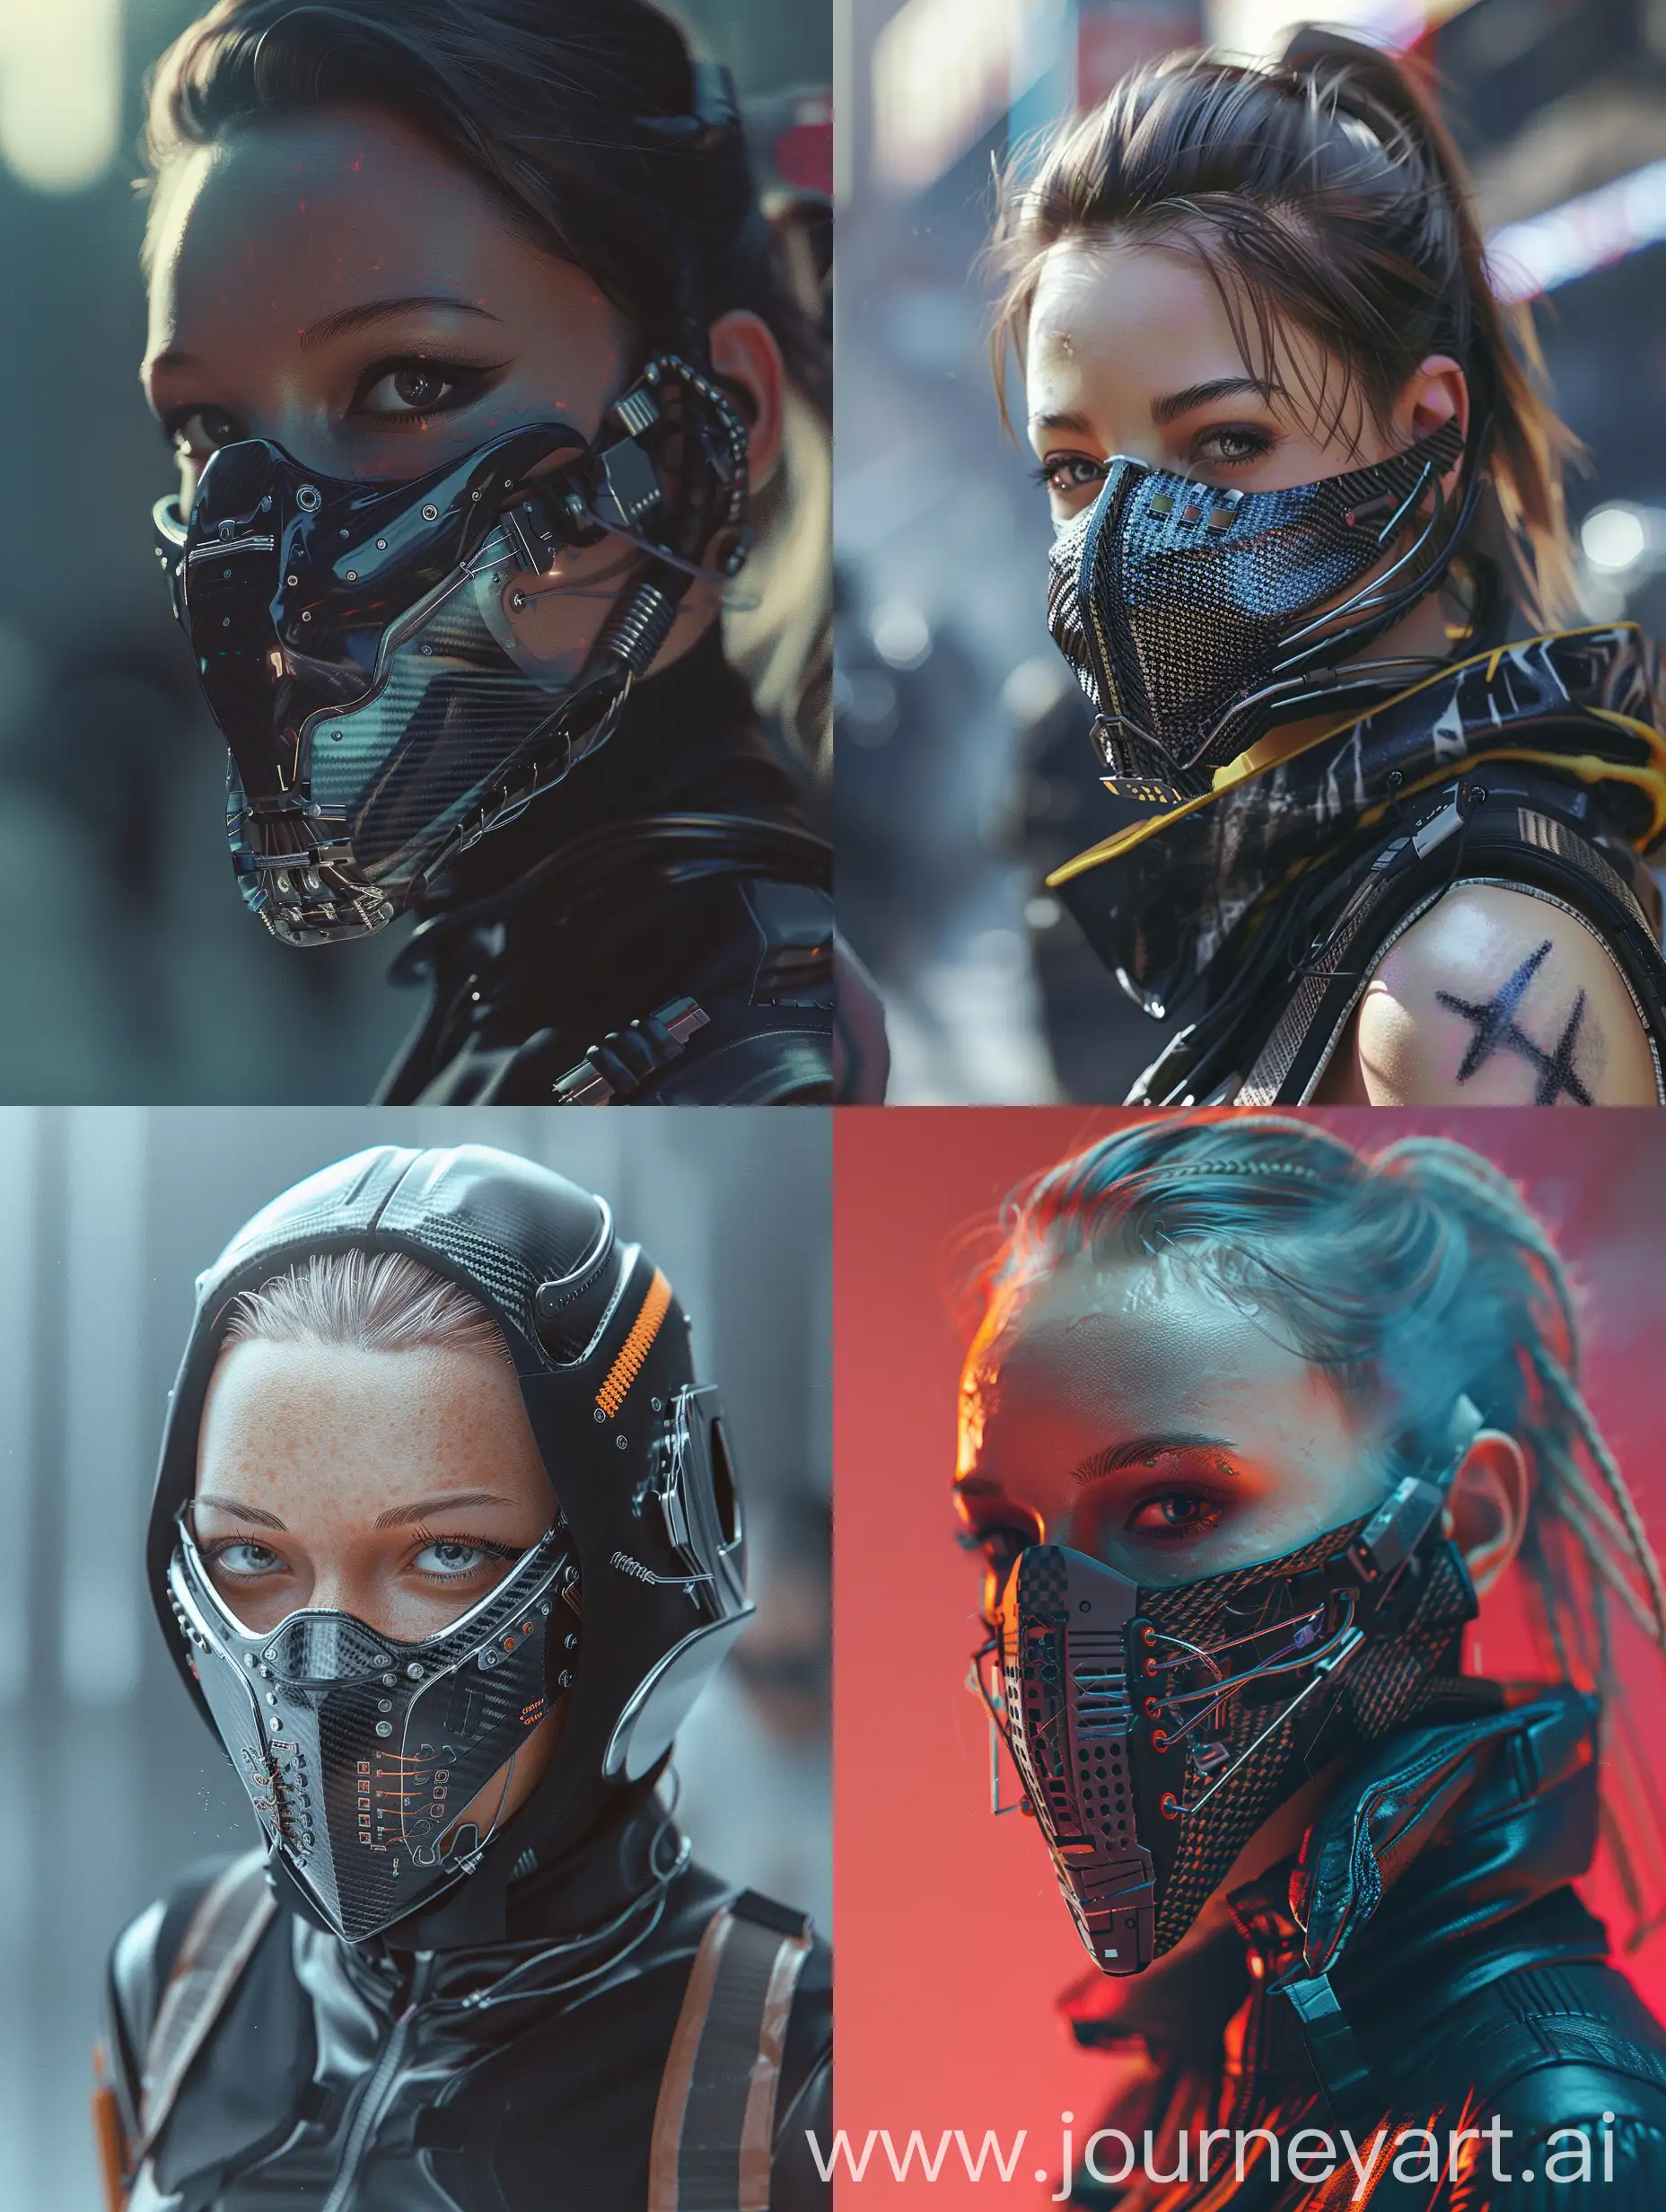 Captivating-Cyberpunk-Character-with-Advanced-MouthCovering-Mask-and-Streetwear-Attire